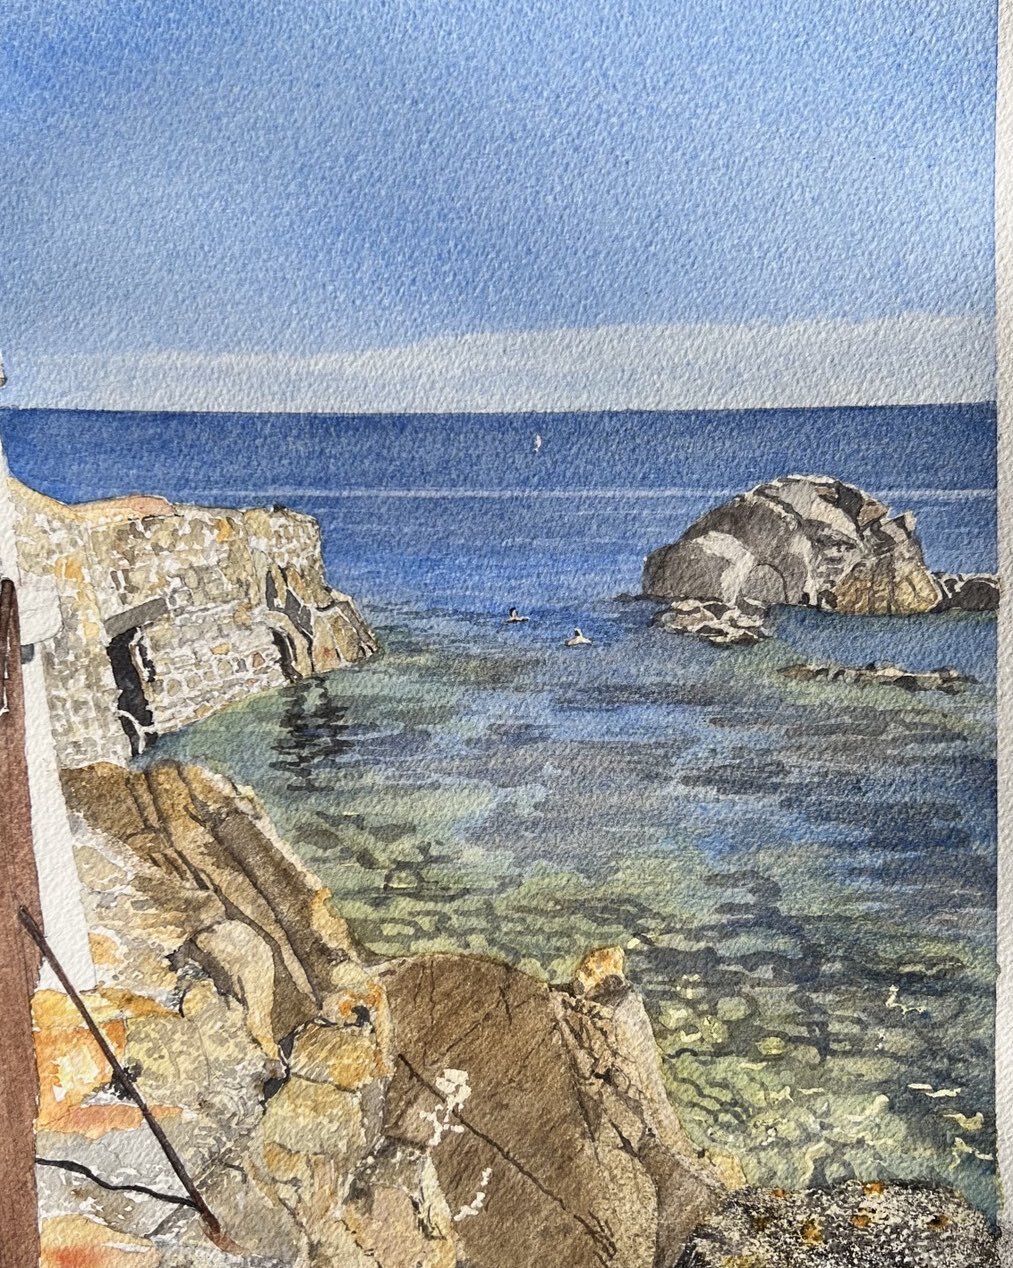 The Forty Foot Sandycove

Daily swims🏊&zwj;♀️and laughs it has stolen my &hearts;️ 
Painted by many enjoyed by all 
.
.
.
#watercolour
#watercolourpainting
#watercoloursocietyofireland
#shirleygiffney
#irishart
#irishartist
#irishwatercolourartist
#